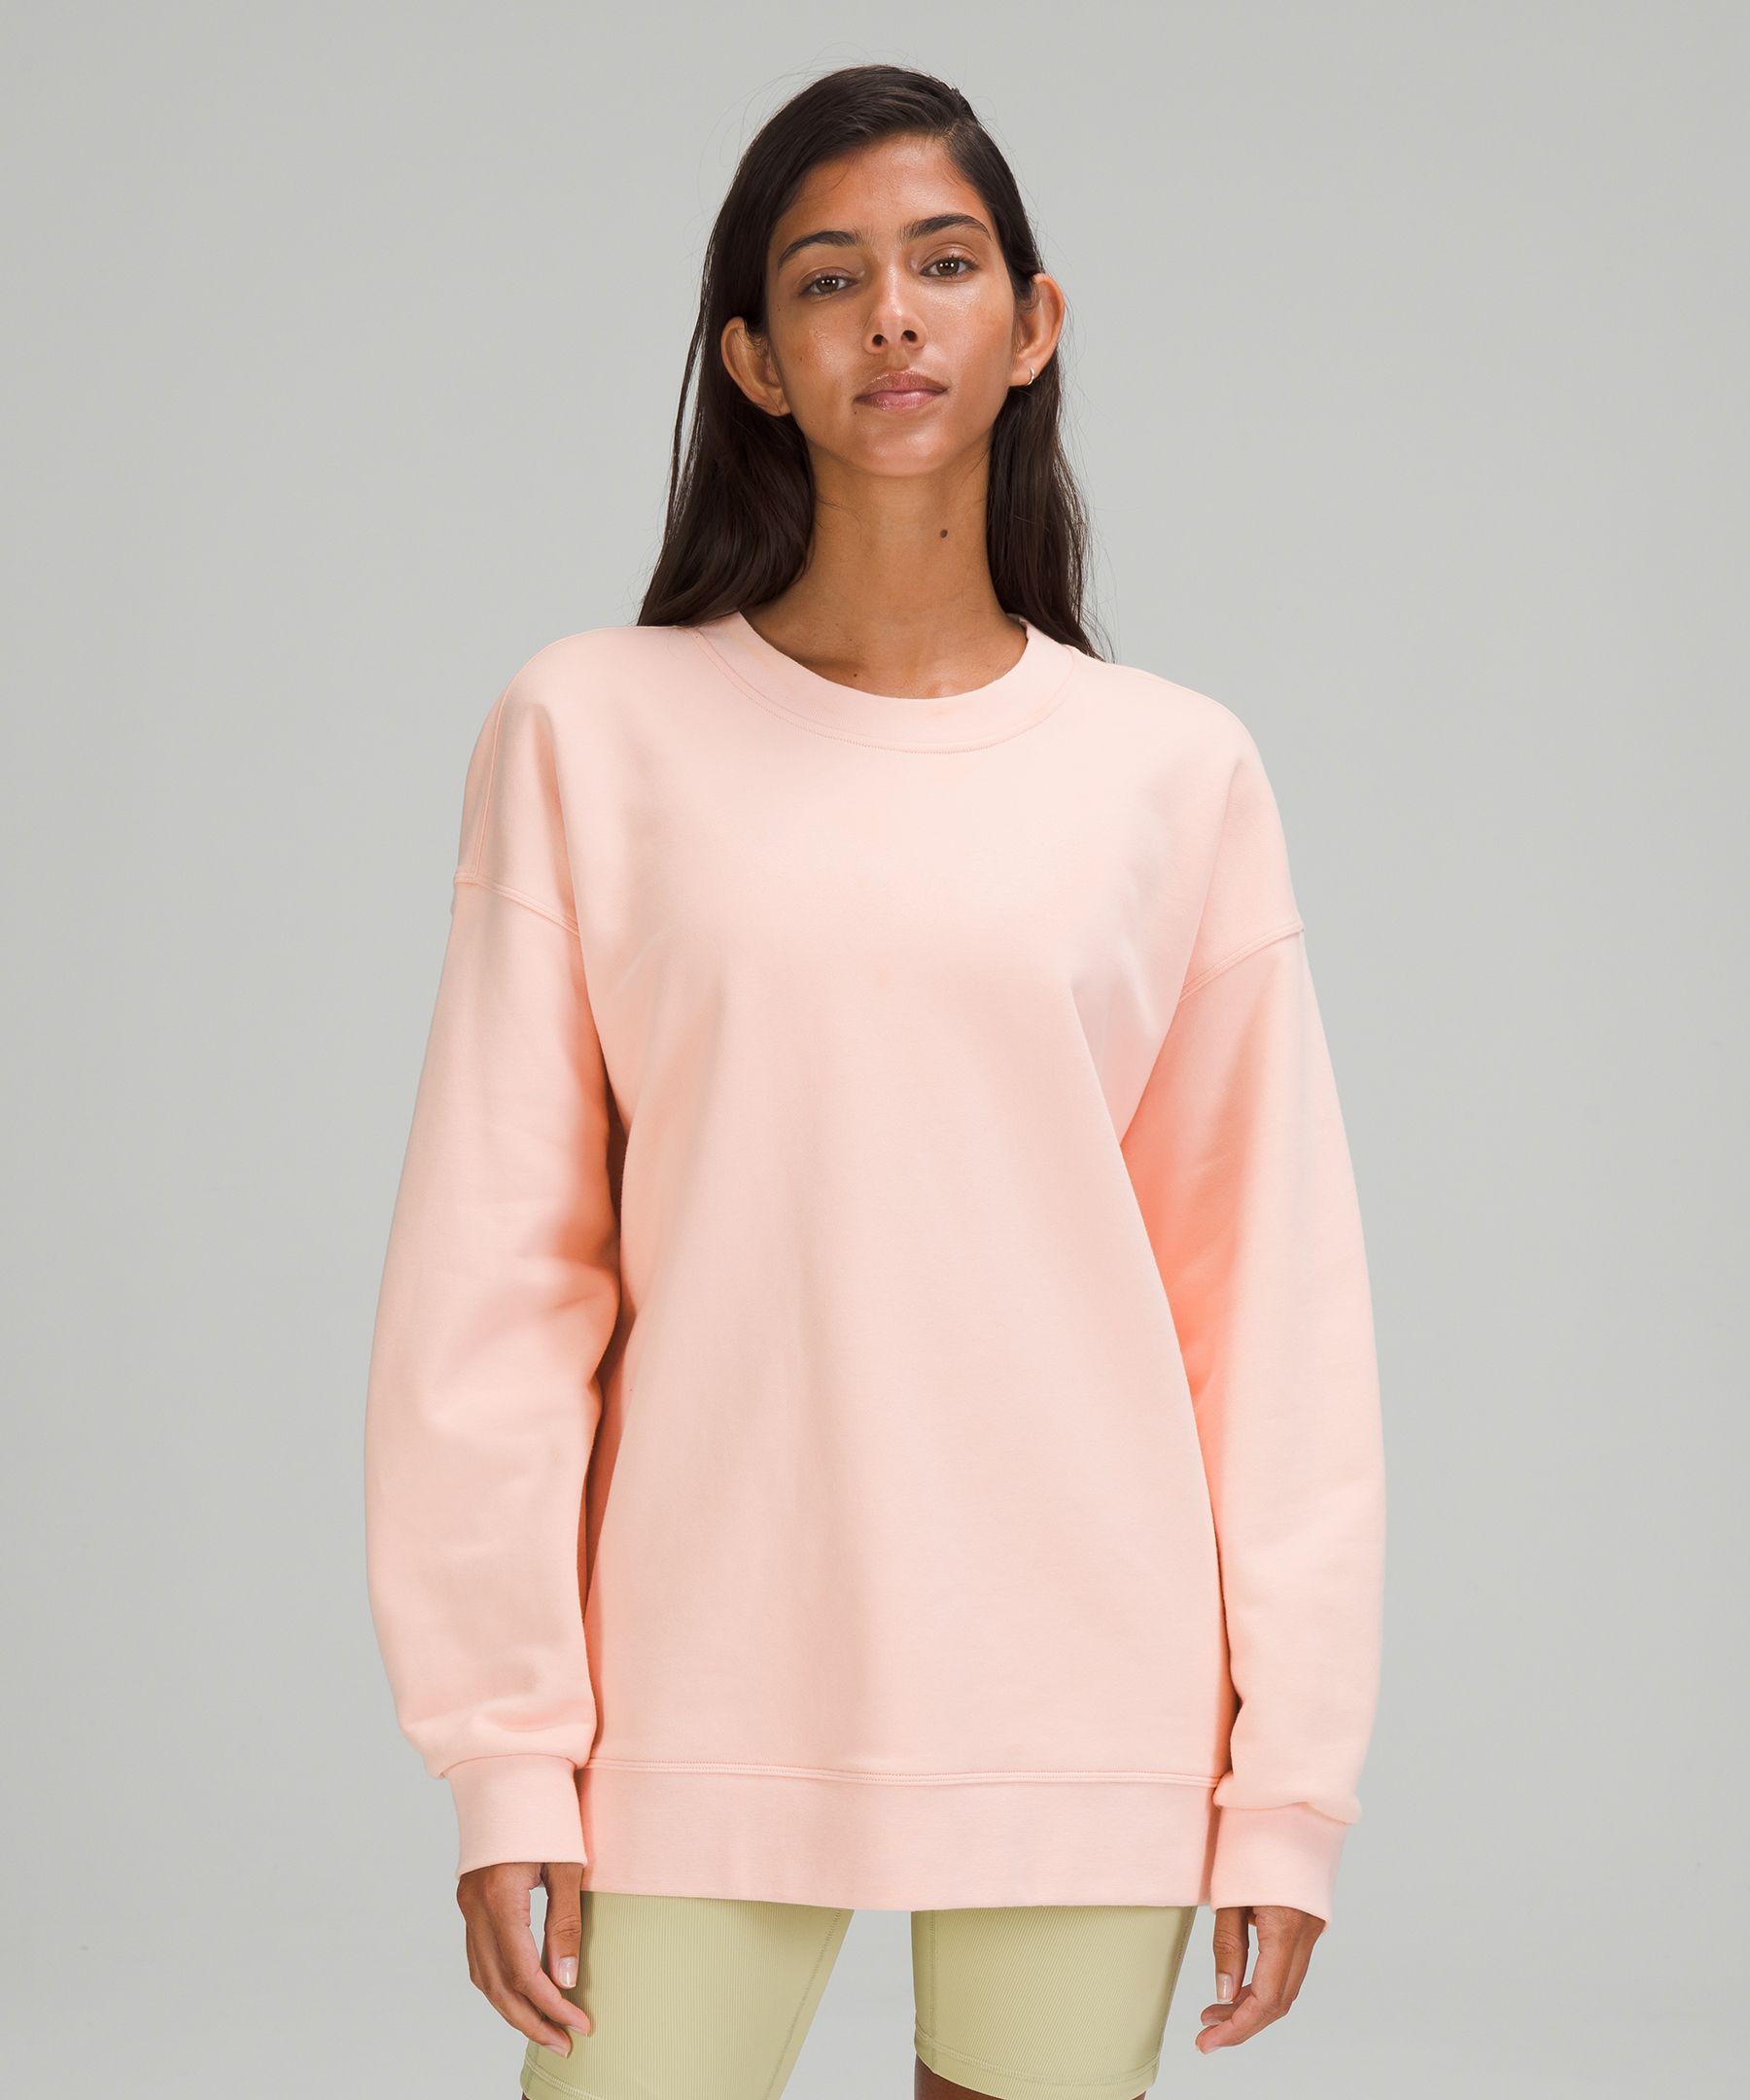 Lululemon Perfectly Oversized Crew In Pink